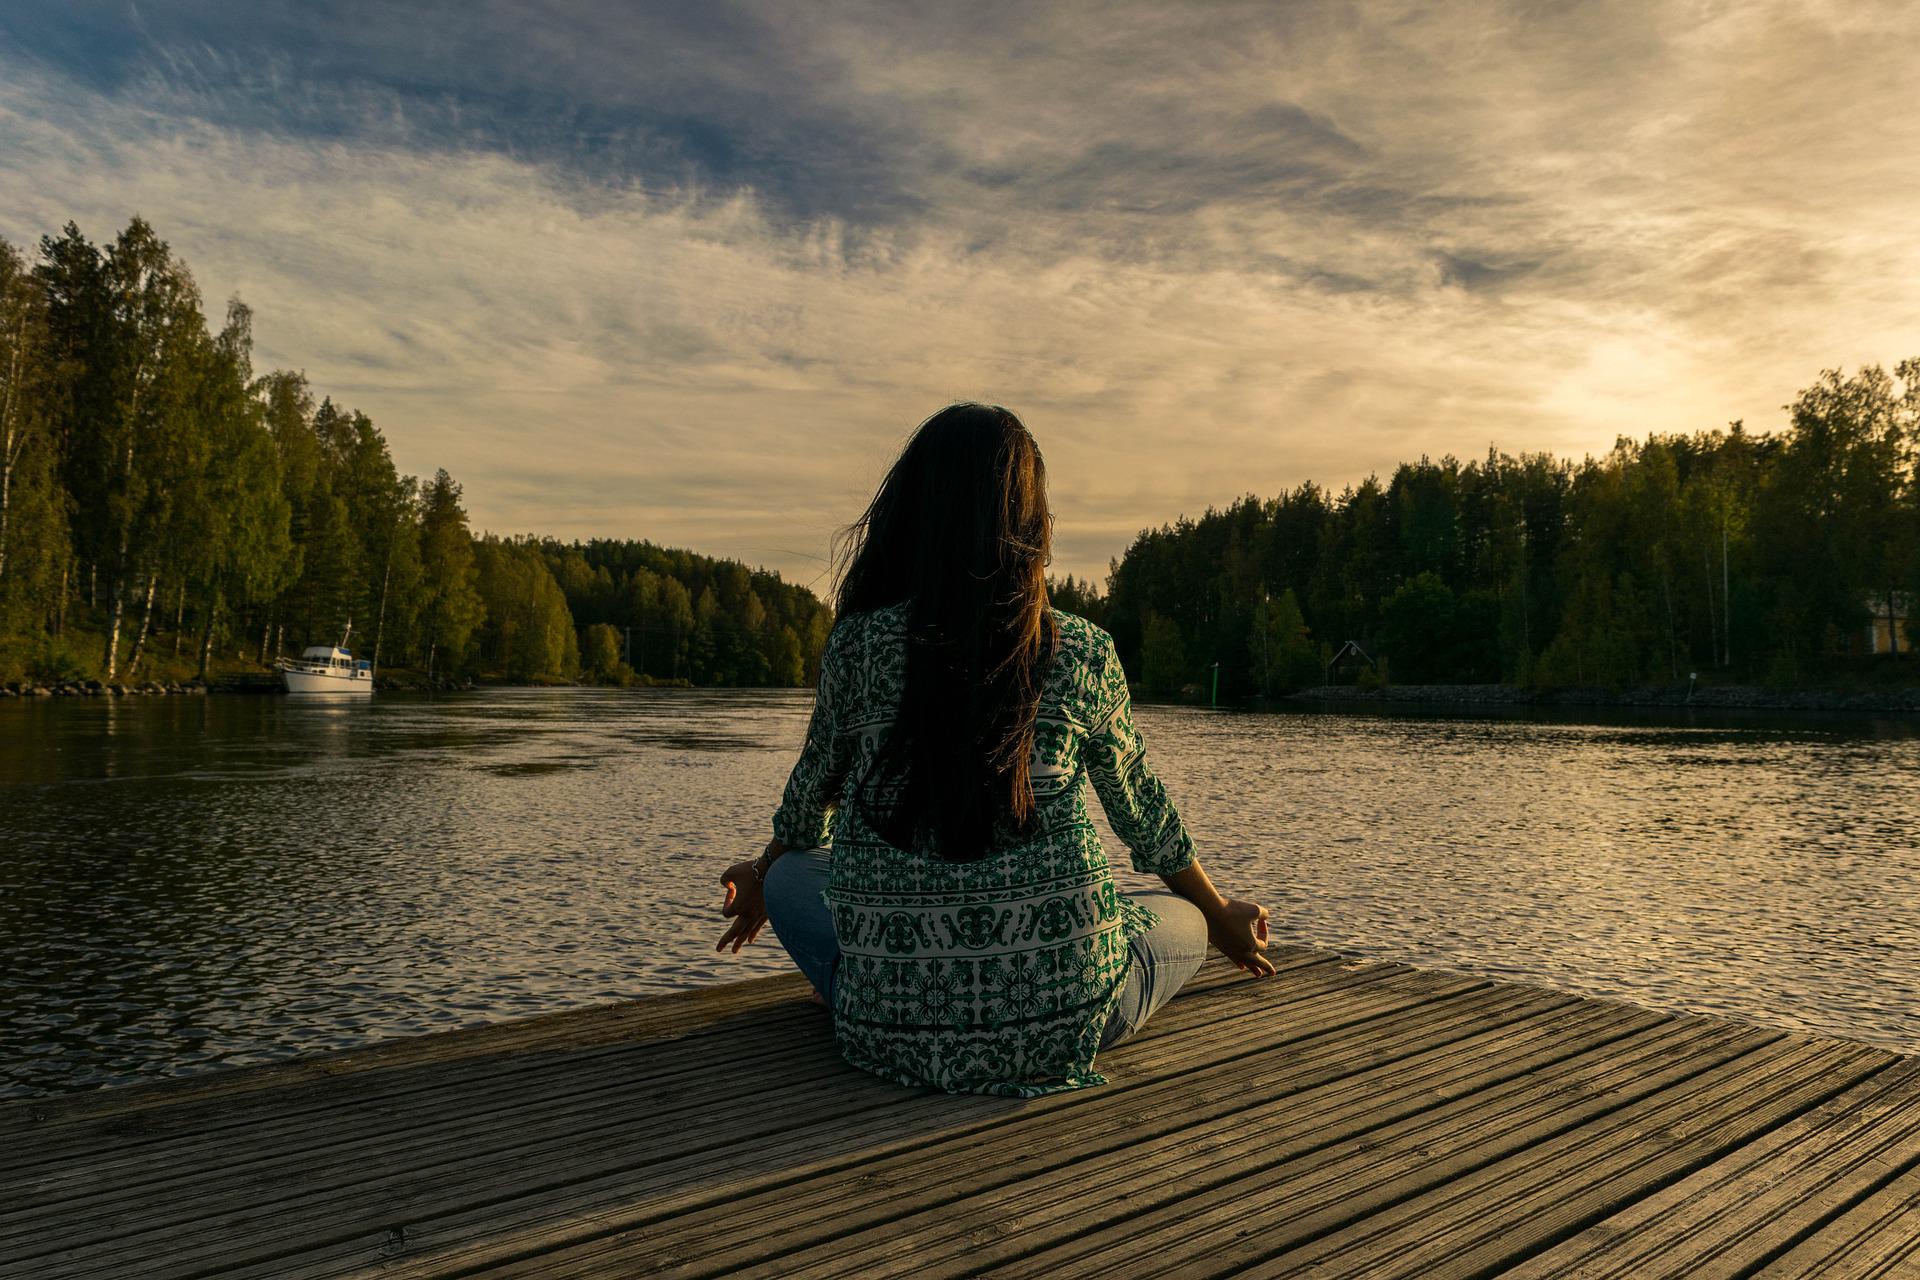 A 15-Minute Meditation to Focus the Mind